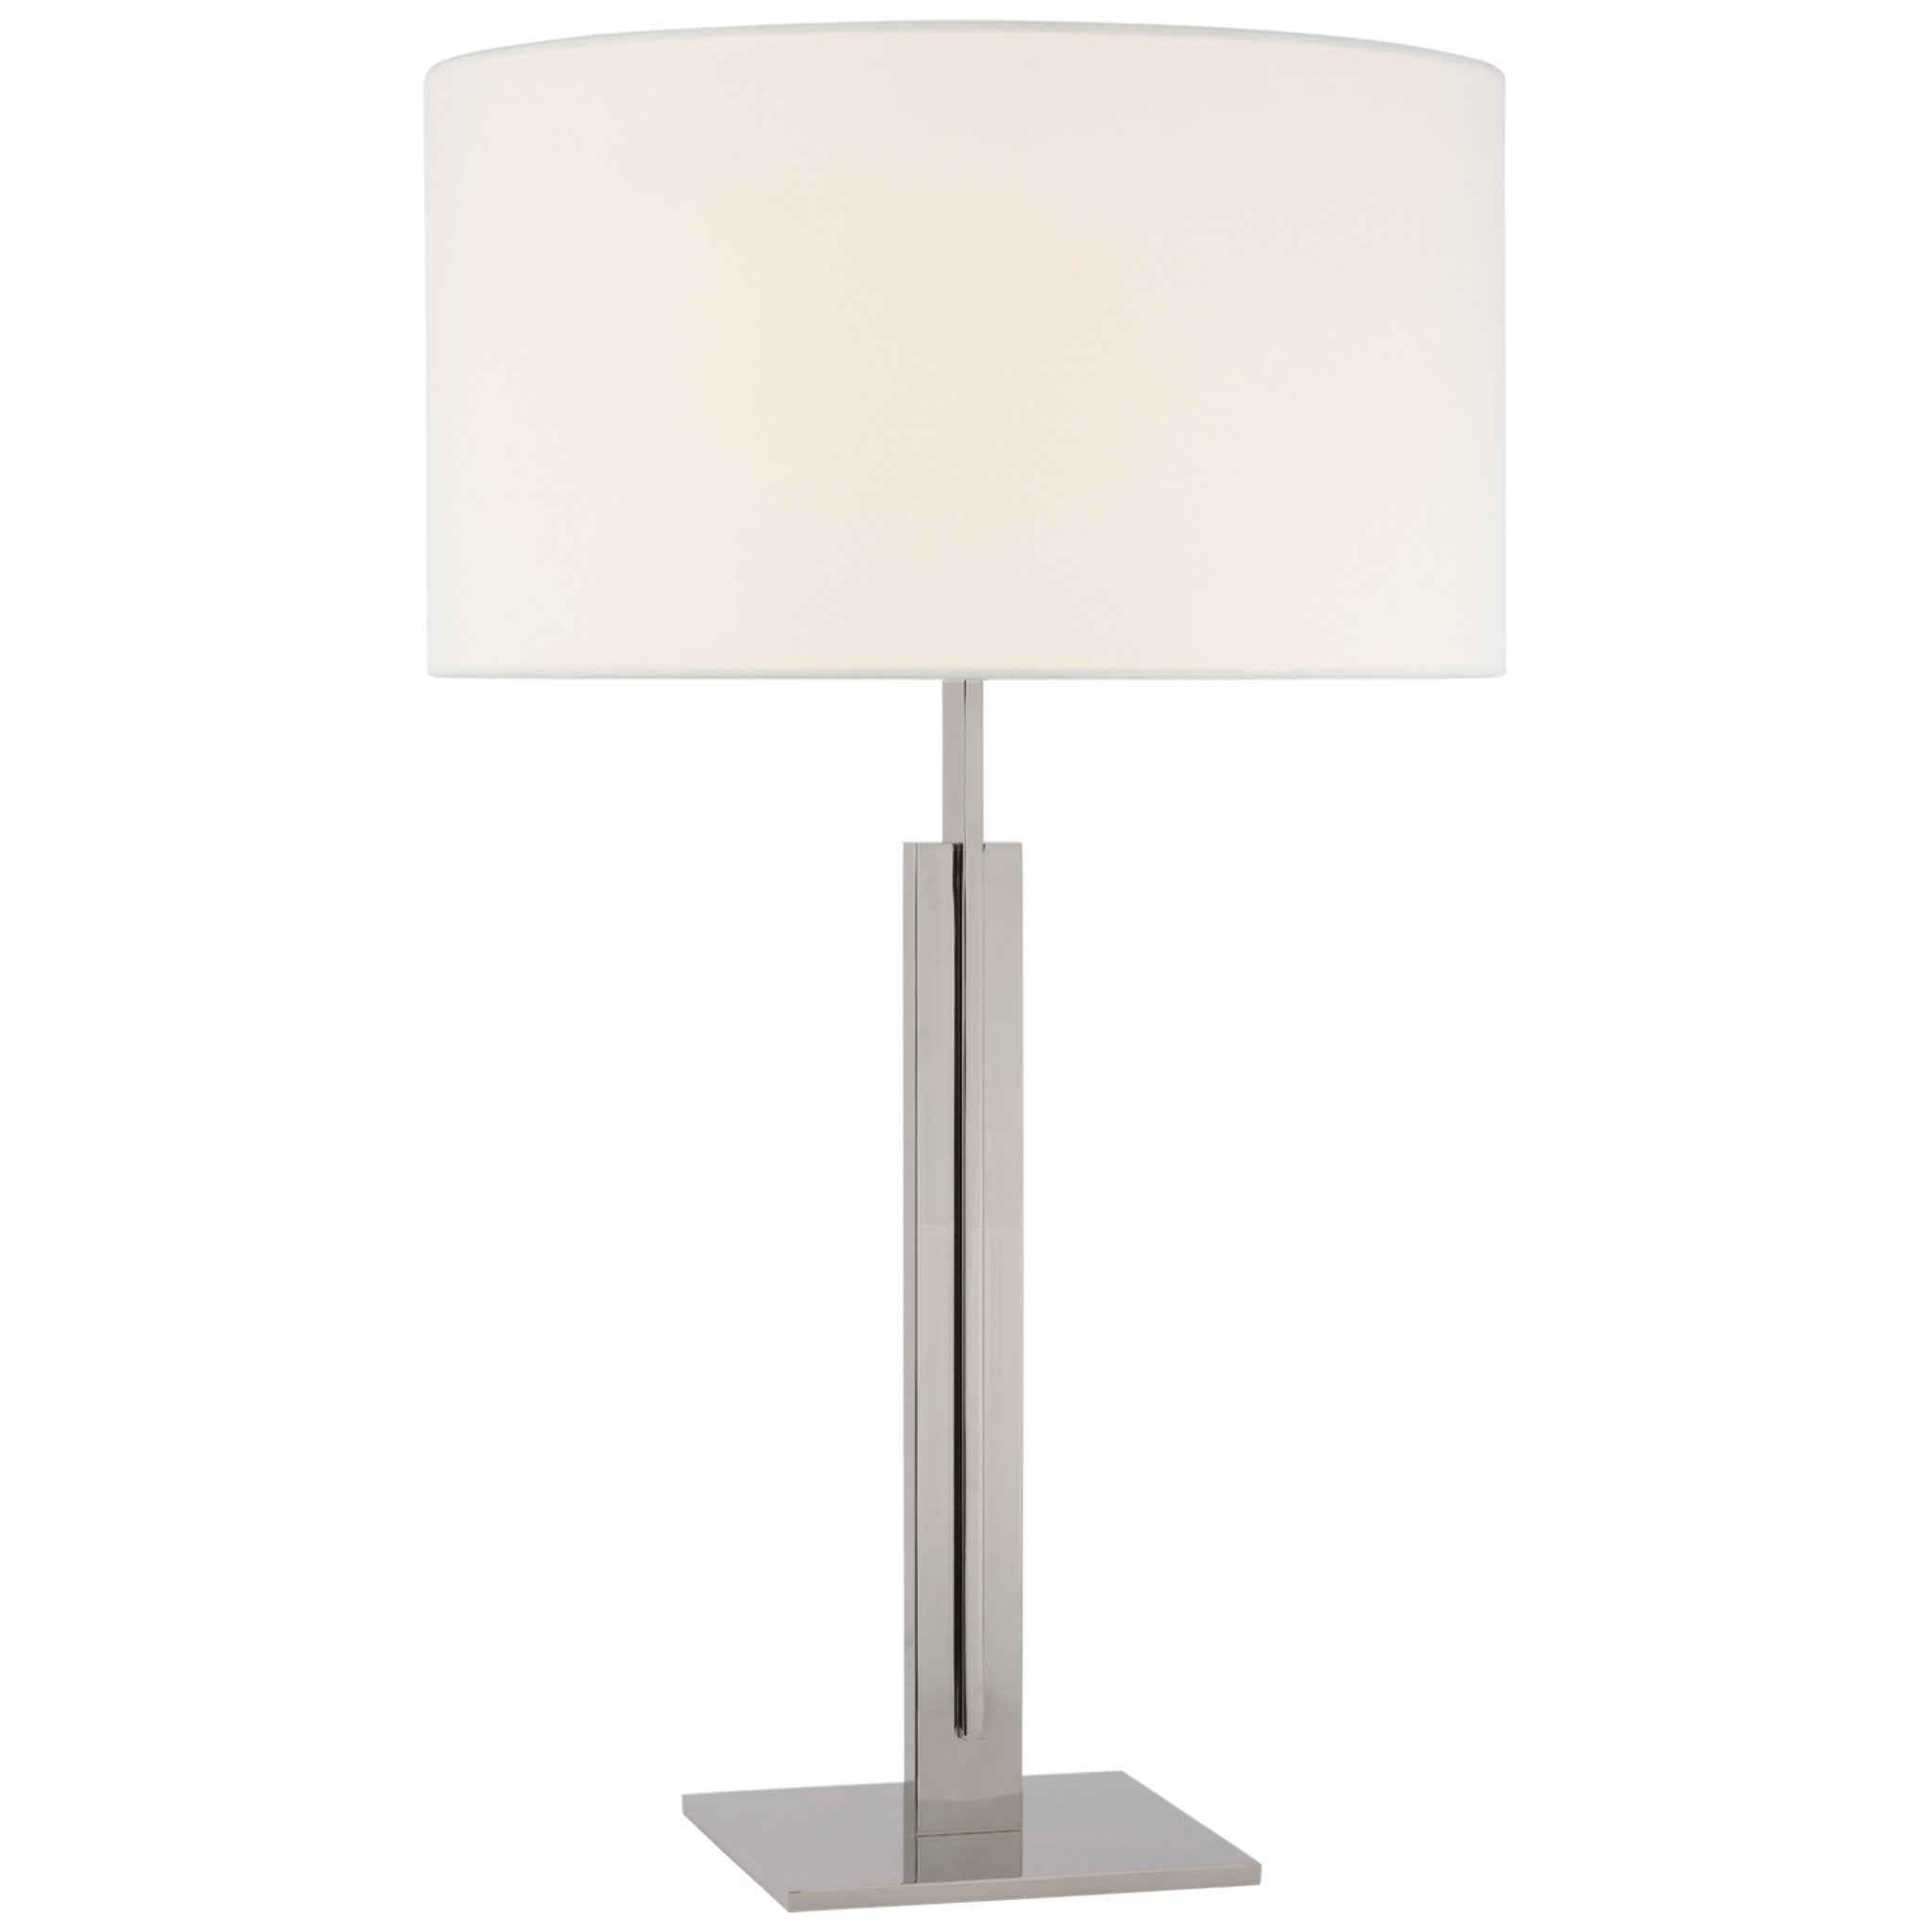 Ian K. Fowler Serre Large Table Lamp in Polished Nickel with Linen Shade